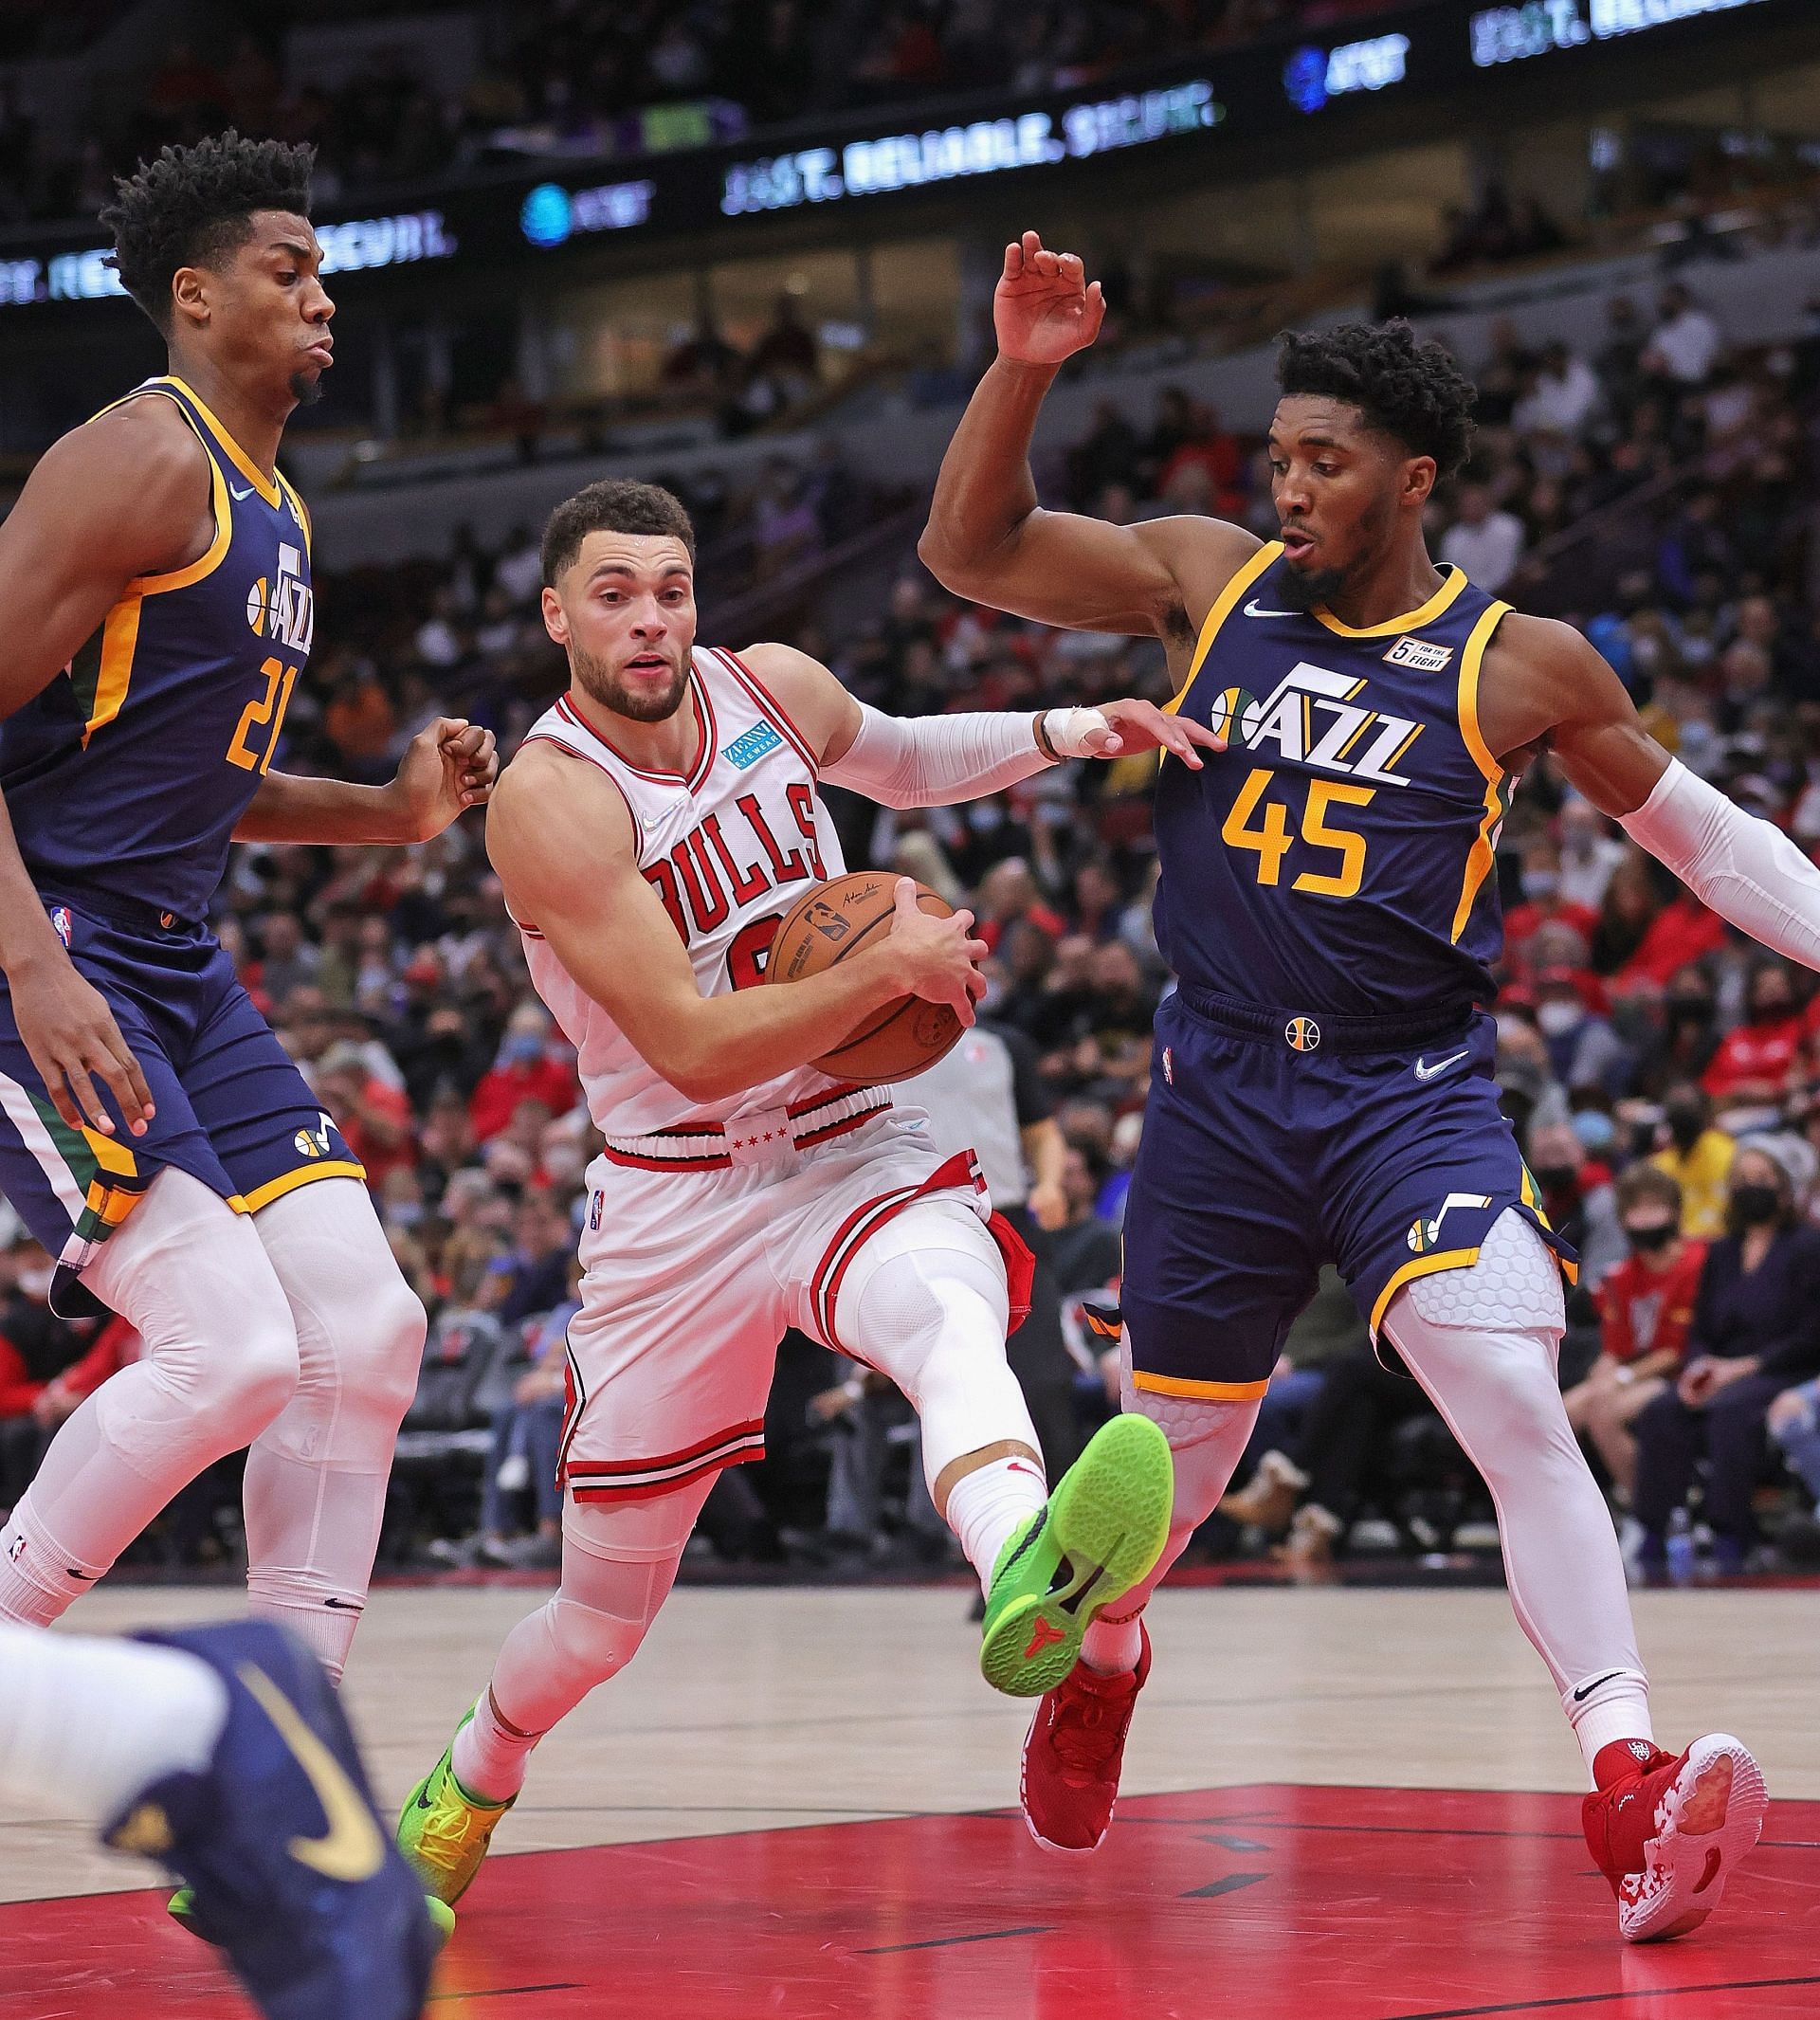 The Chicago Bulls proved too much for the Utah Jazz to handle in their last game